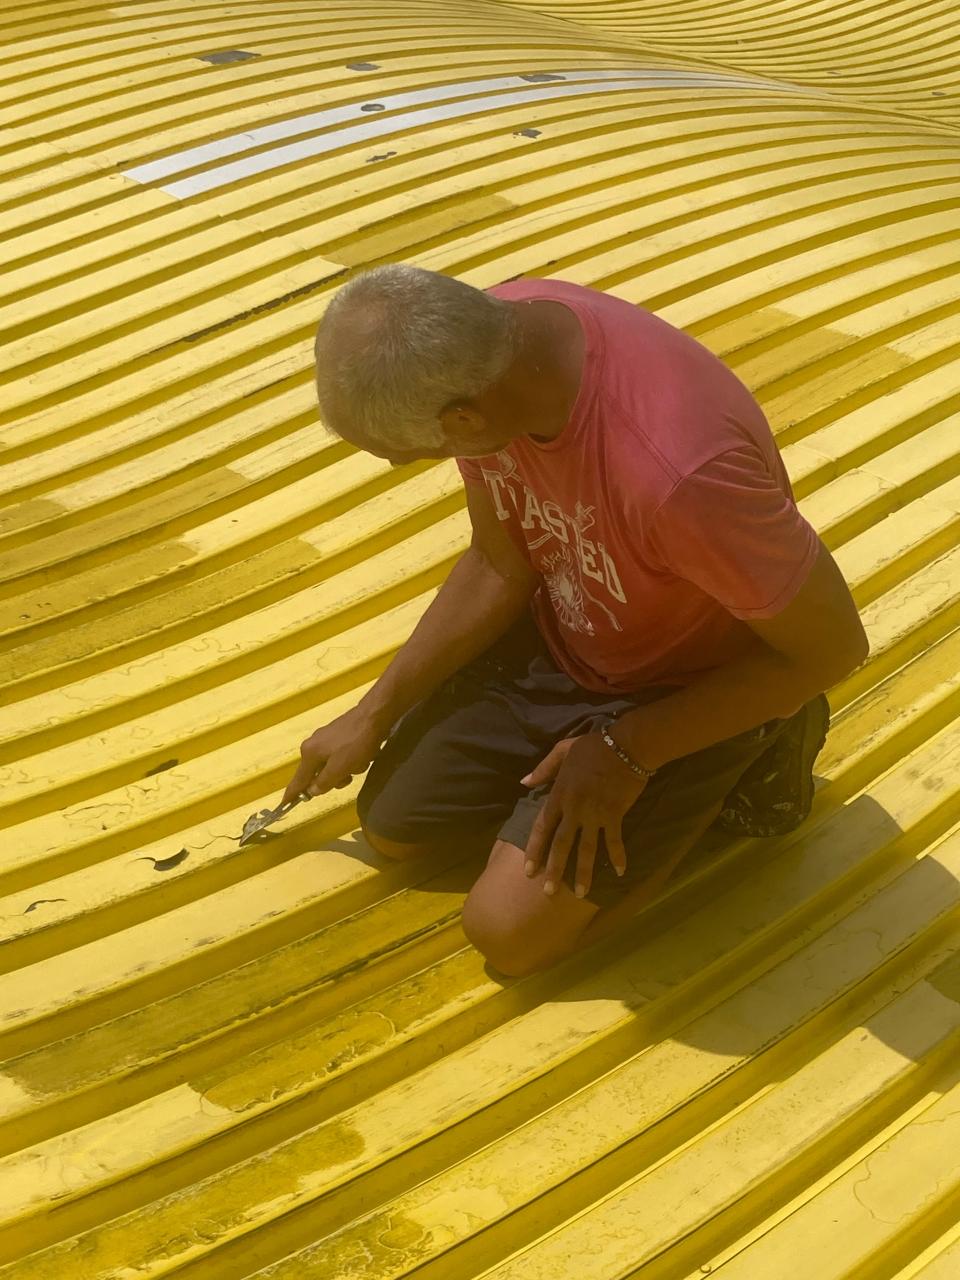 Patrick Peterson of Edwardsville scrapes paint on the Giant Slide on Thursday, Aug. 3, 2023. The slide is one of the fixtures of the Illinois State Fair, which runs Thursday through Aug. 20.